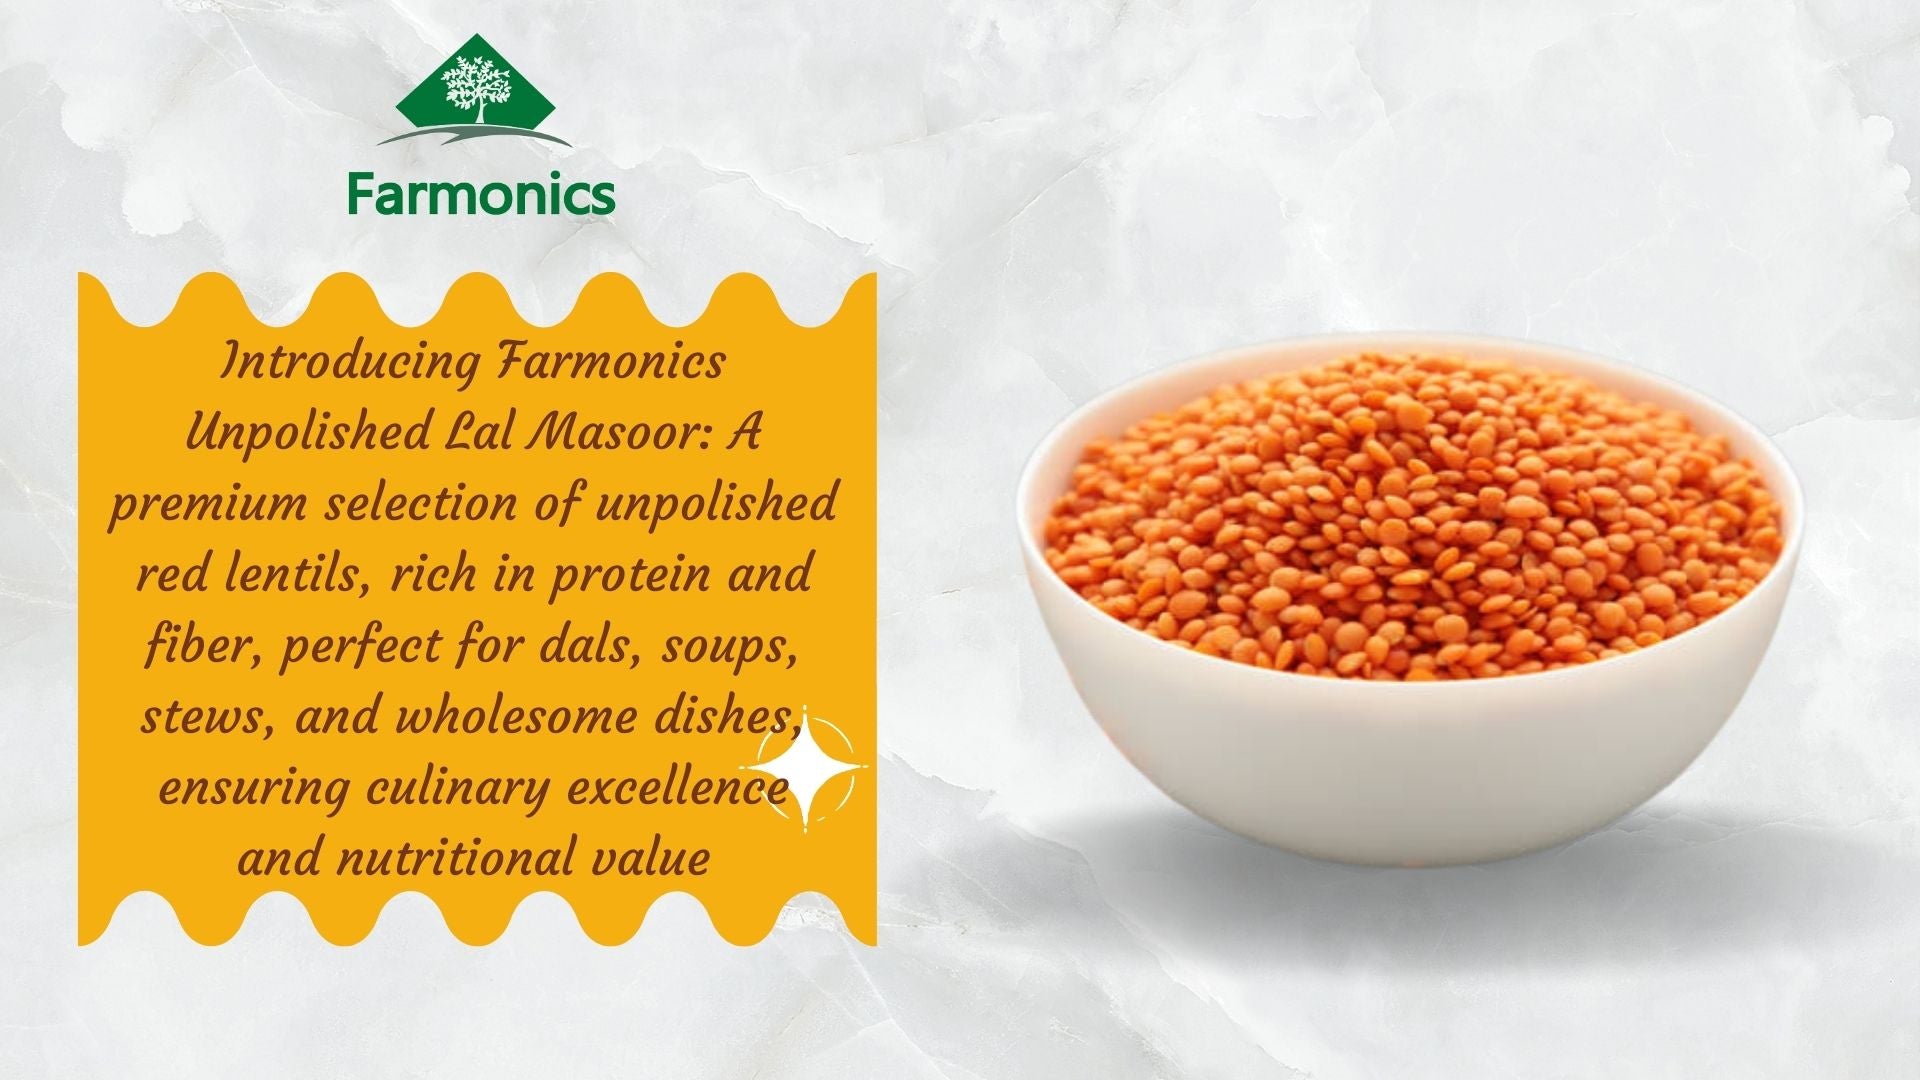 Here are some of the information about farmonics premioum quality   lal masoor 